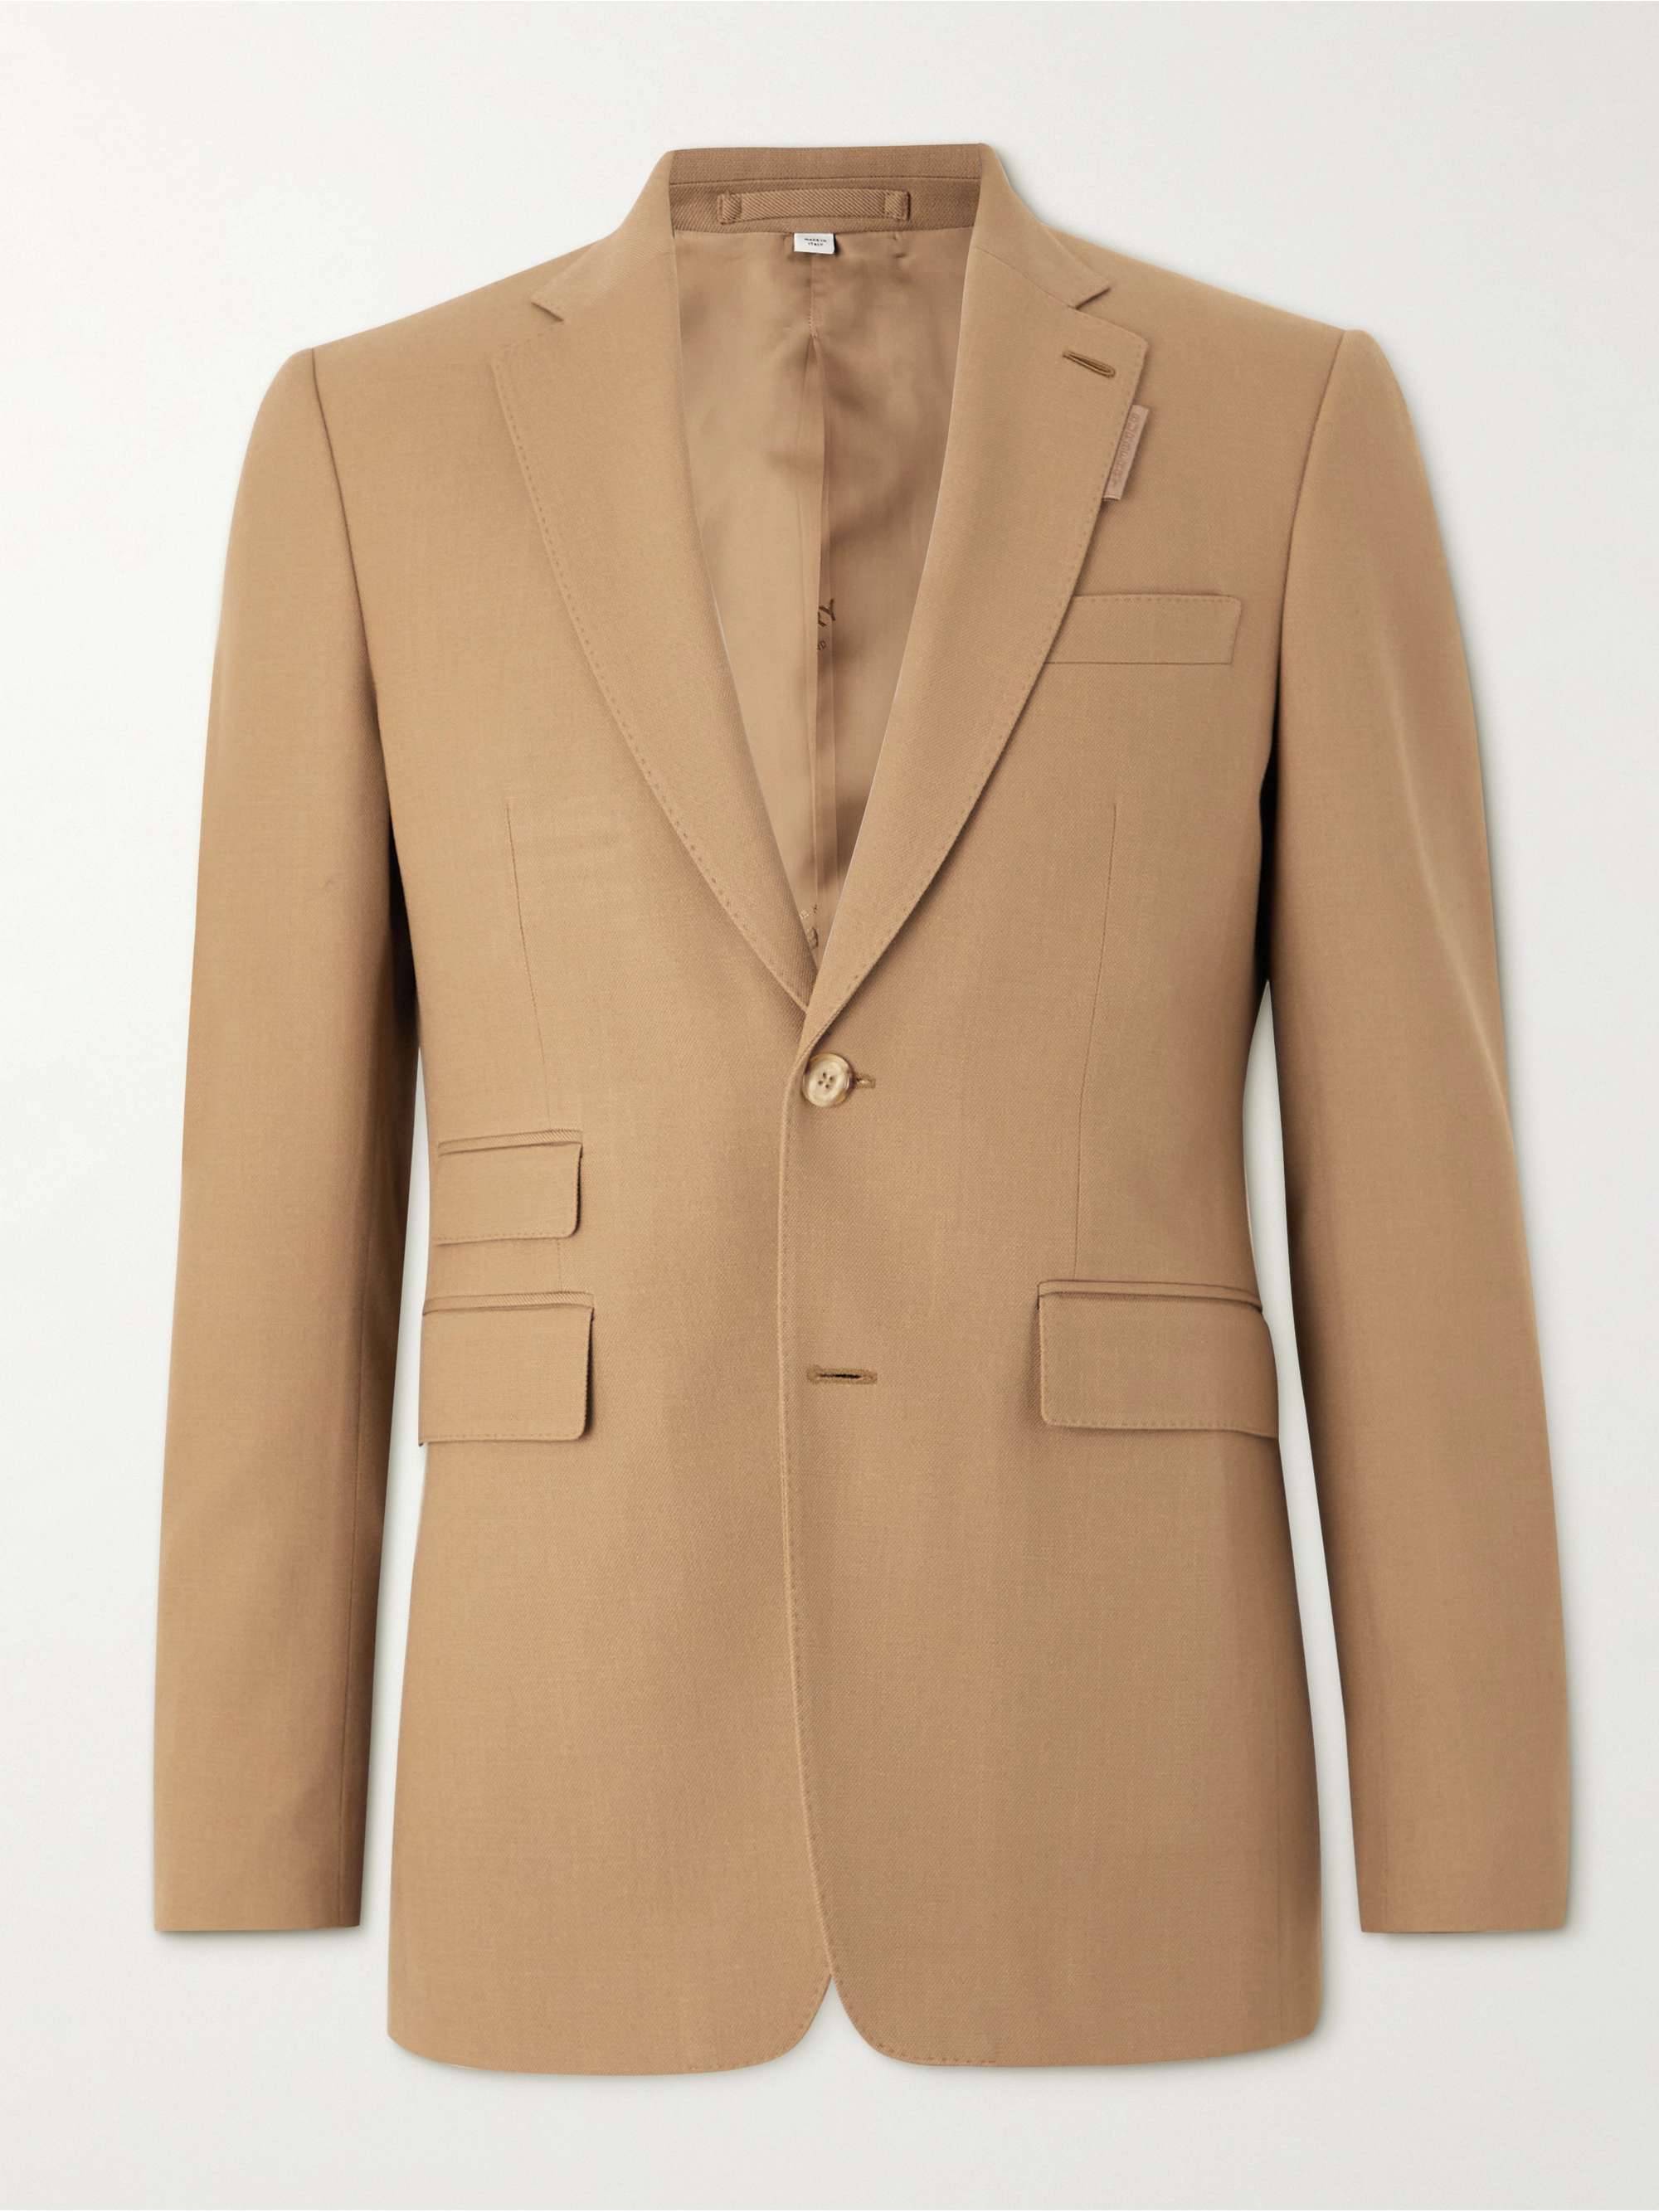 BURBERRY Wool and Silk-Blend Suit Jacket | MR PORTER